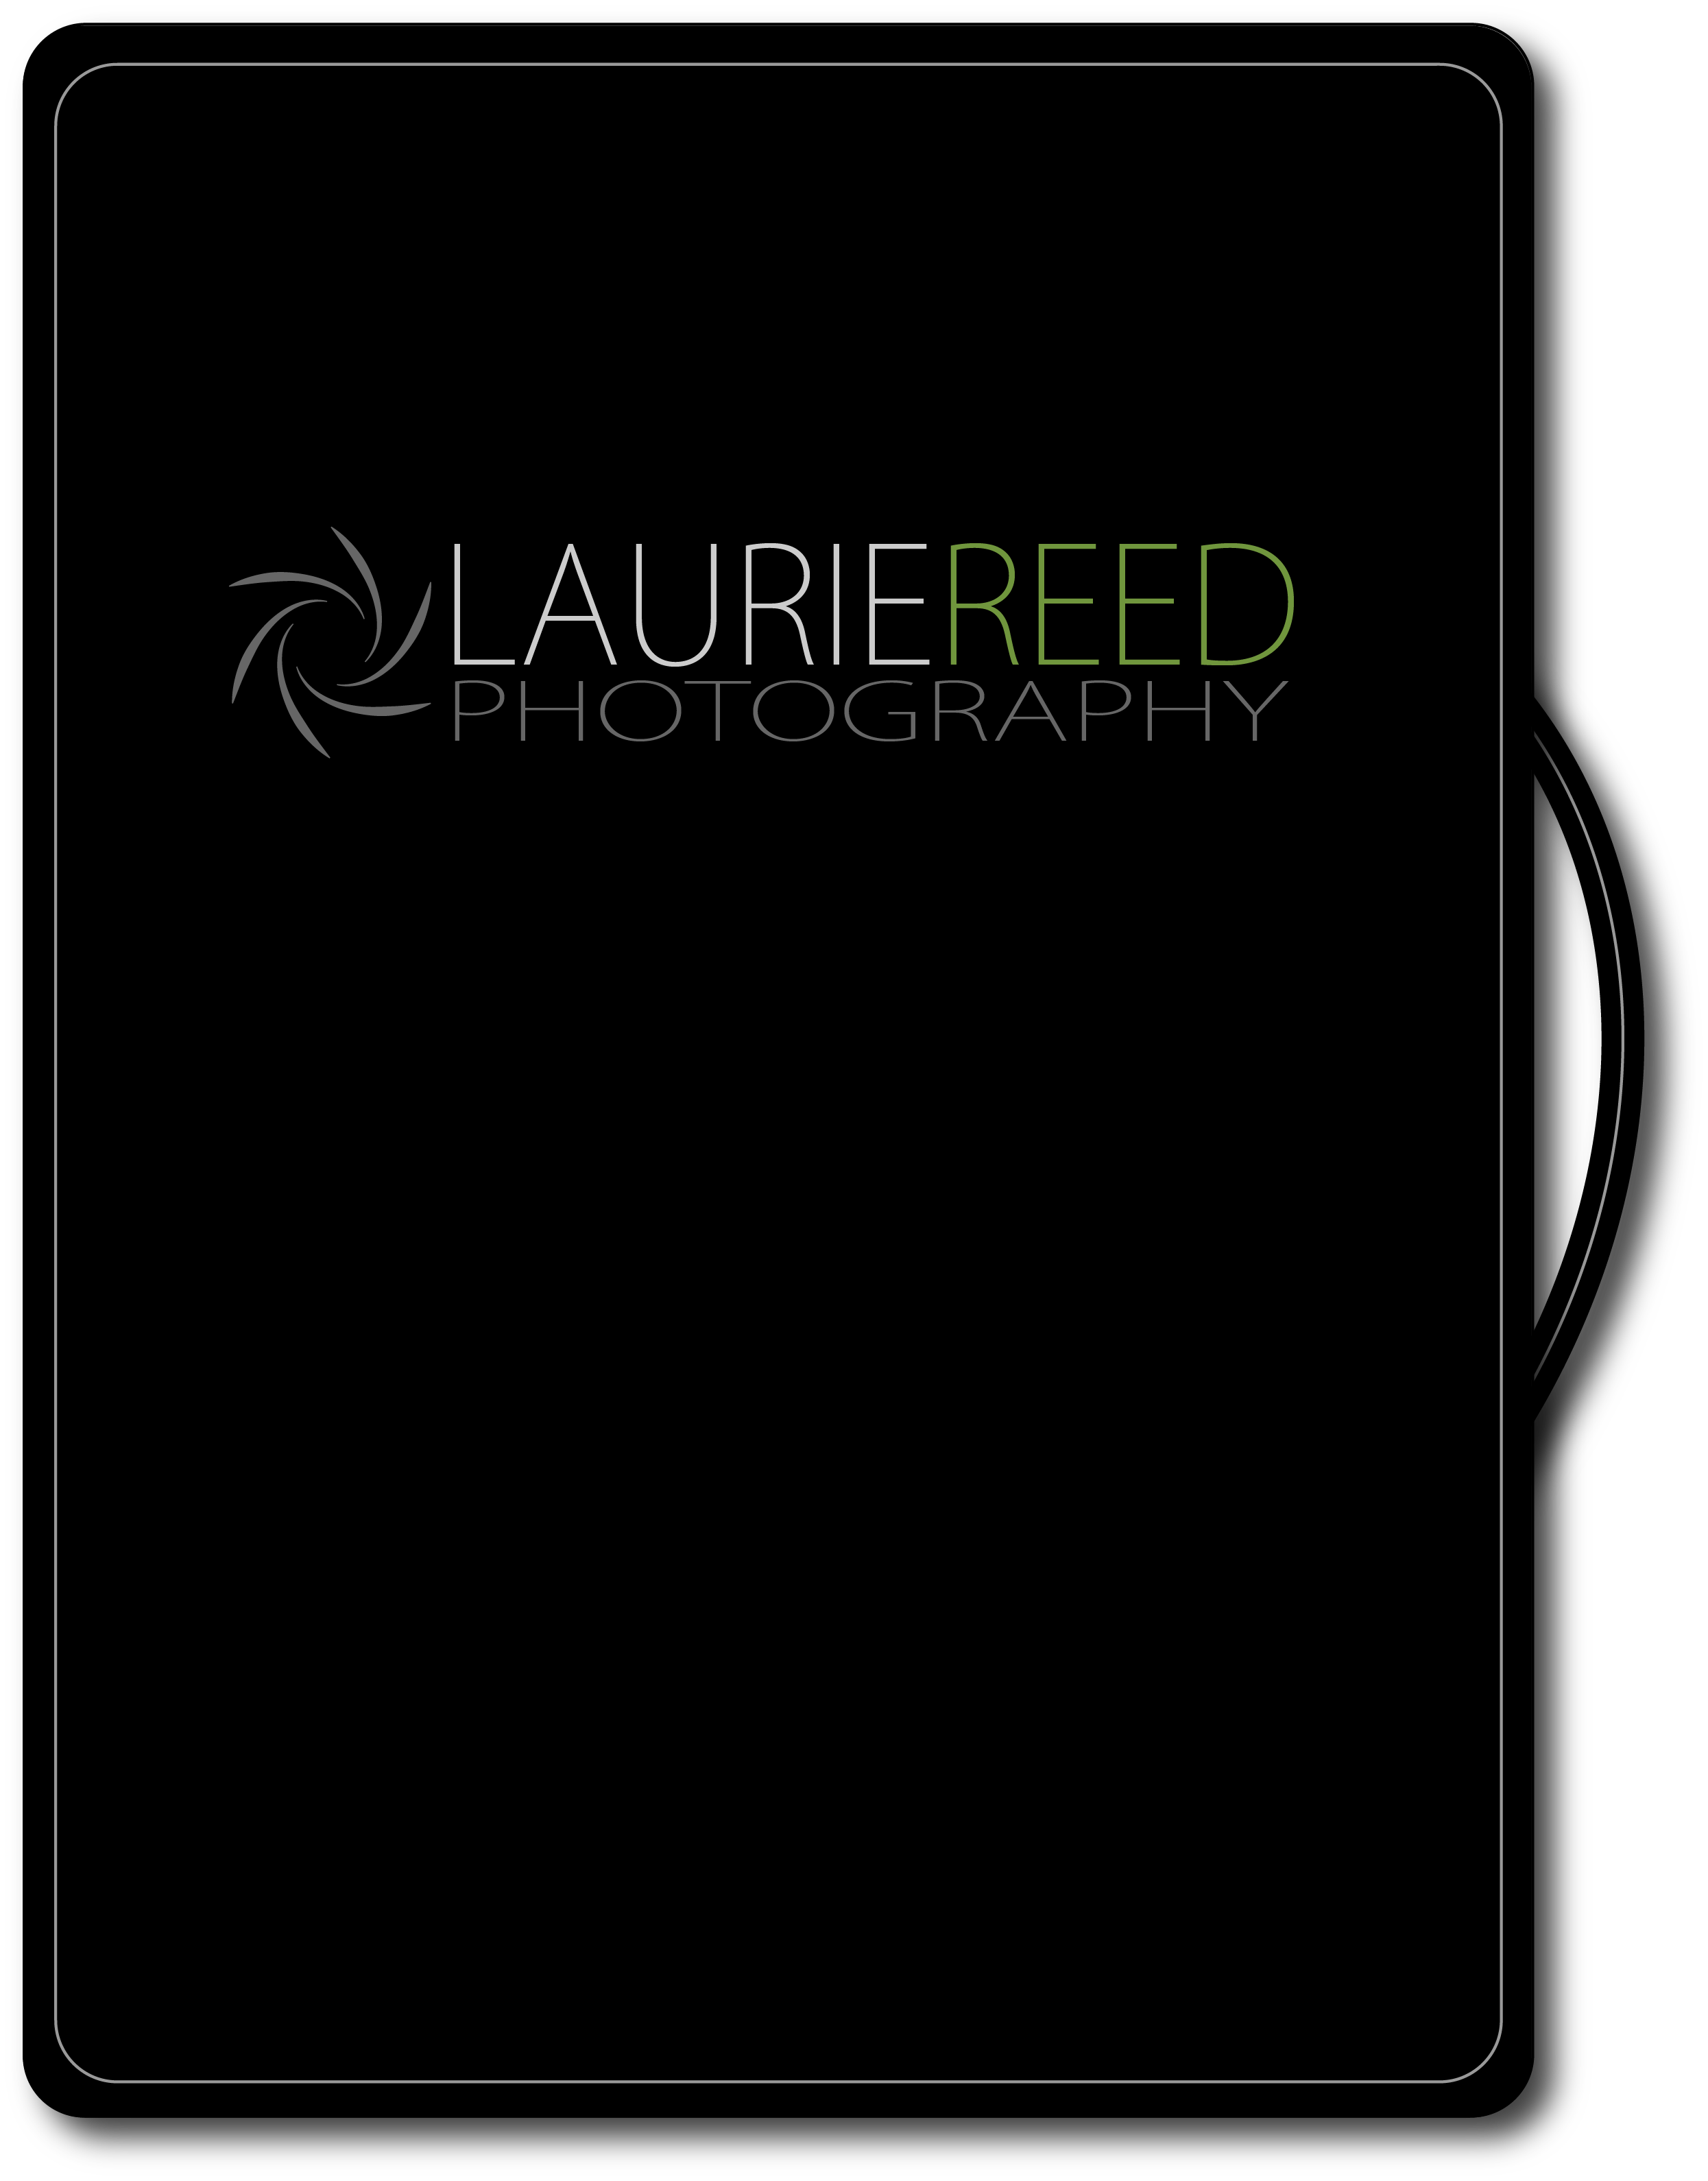 Laurie Reed Photography Portfolio - Lookbook